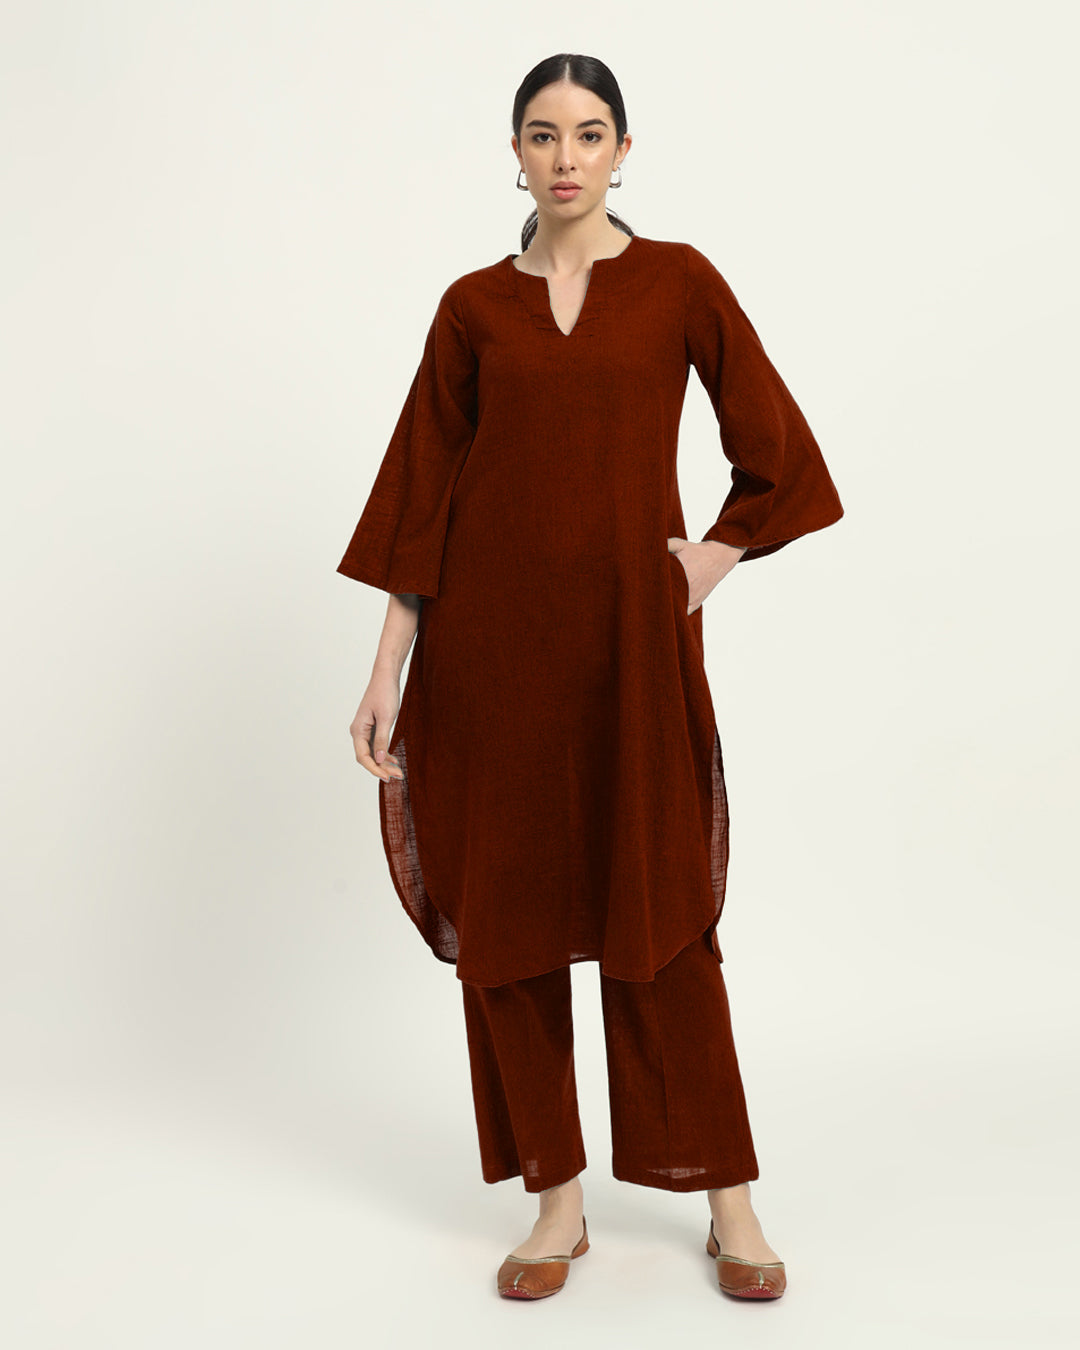 Combo: Blue Dawn & Russet Red Rounded Reverie Solid Kurta